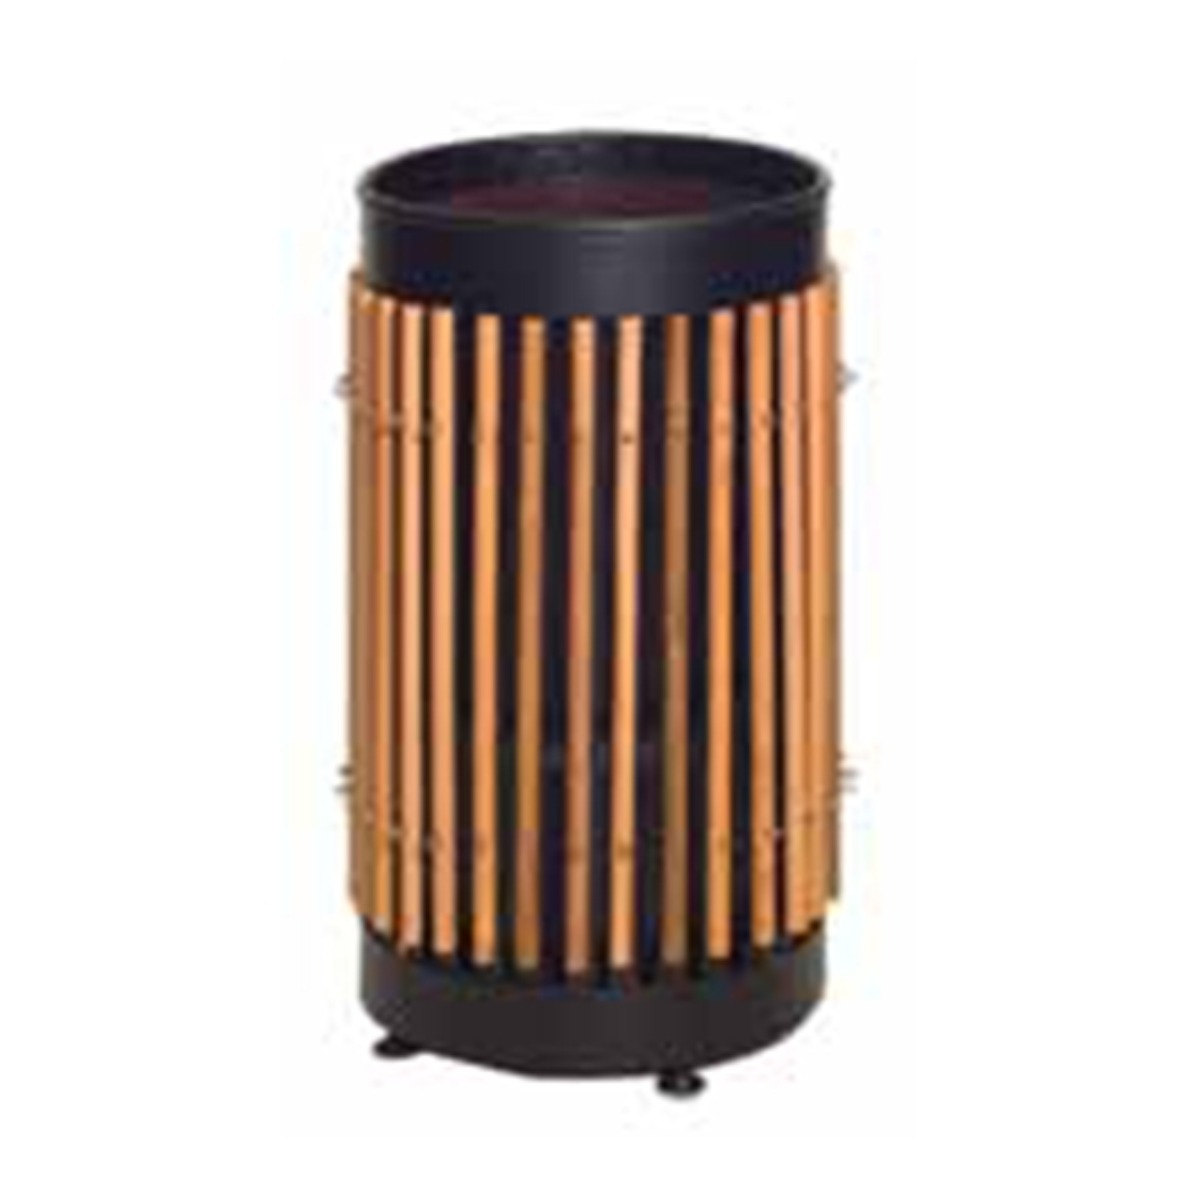 AB-508 Wood Open Space Trash Can